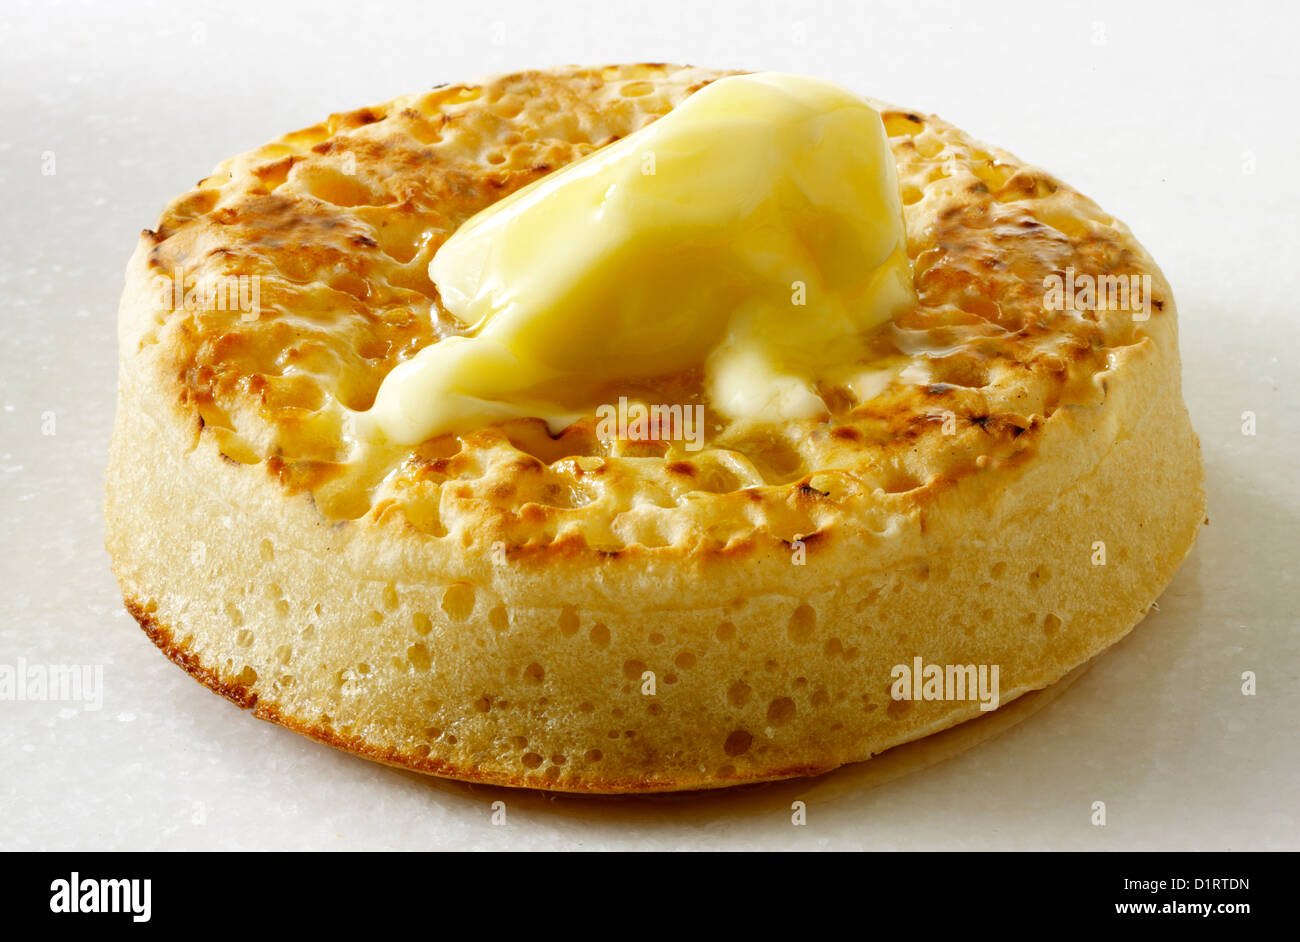 Buttered crumpets food photos Stock Photo